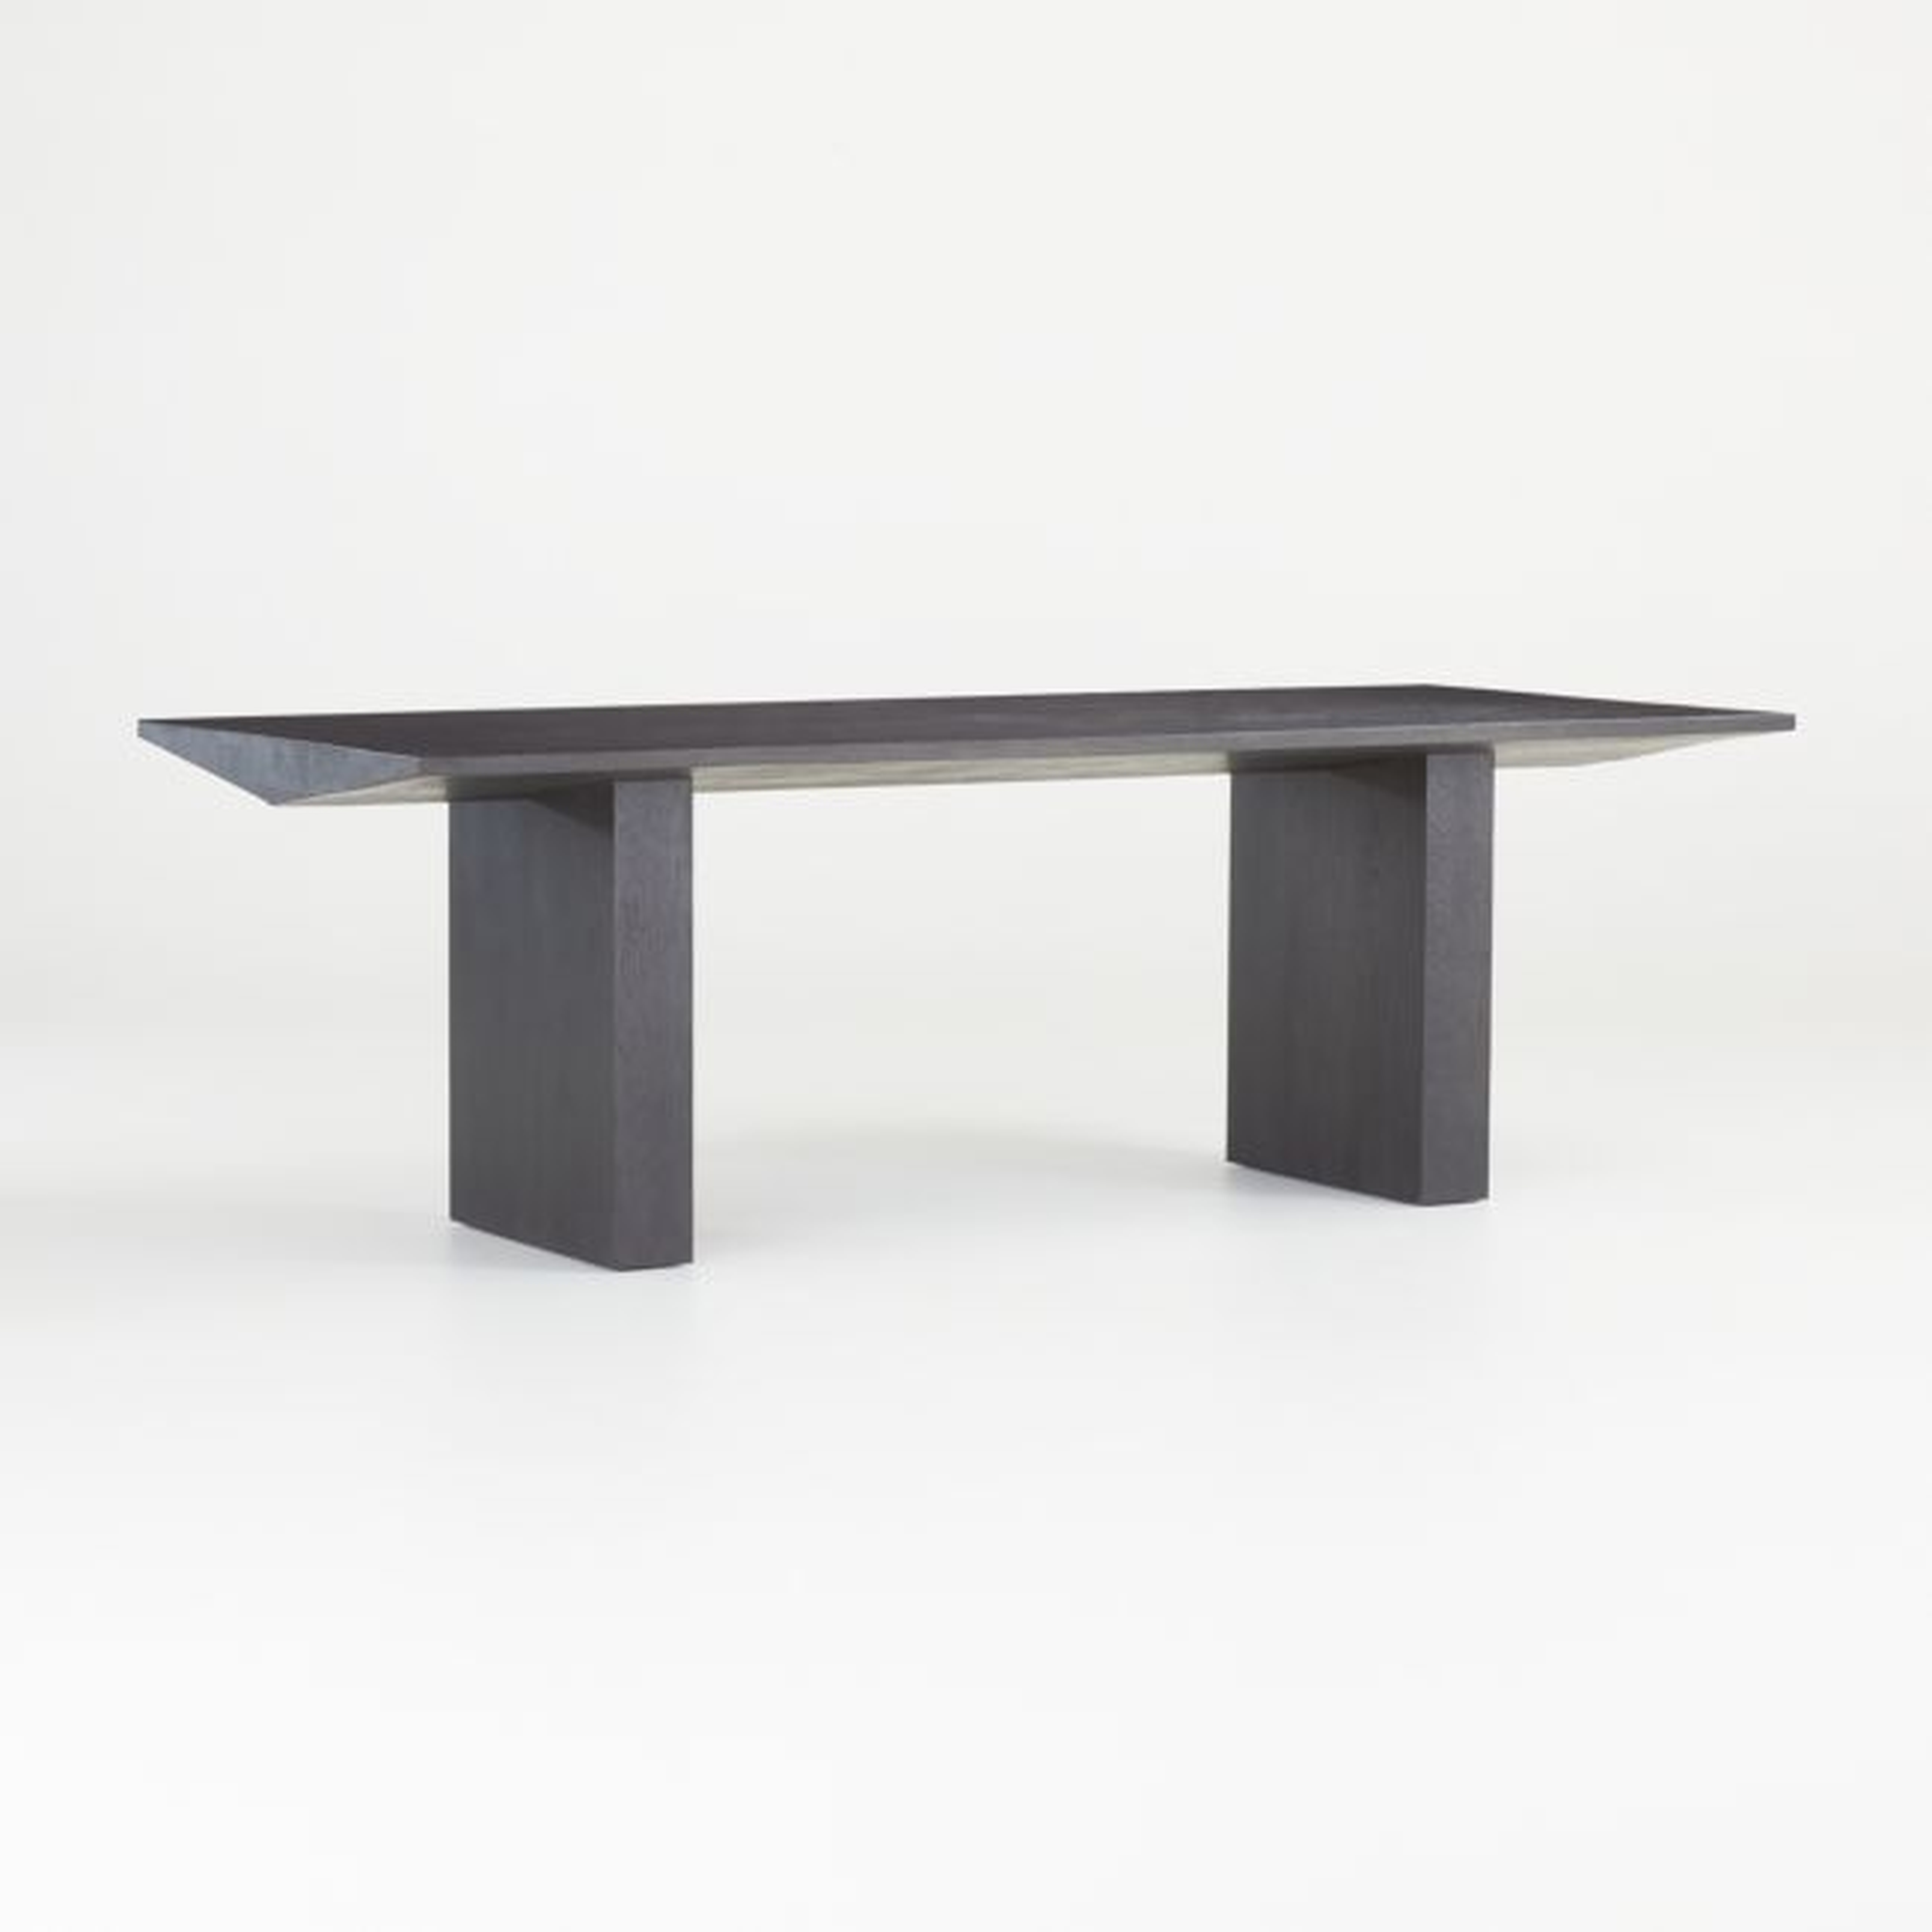 Van Charcoal Brown Wood Dining Table by Leanne Ford - Crate and Barrel